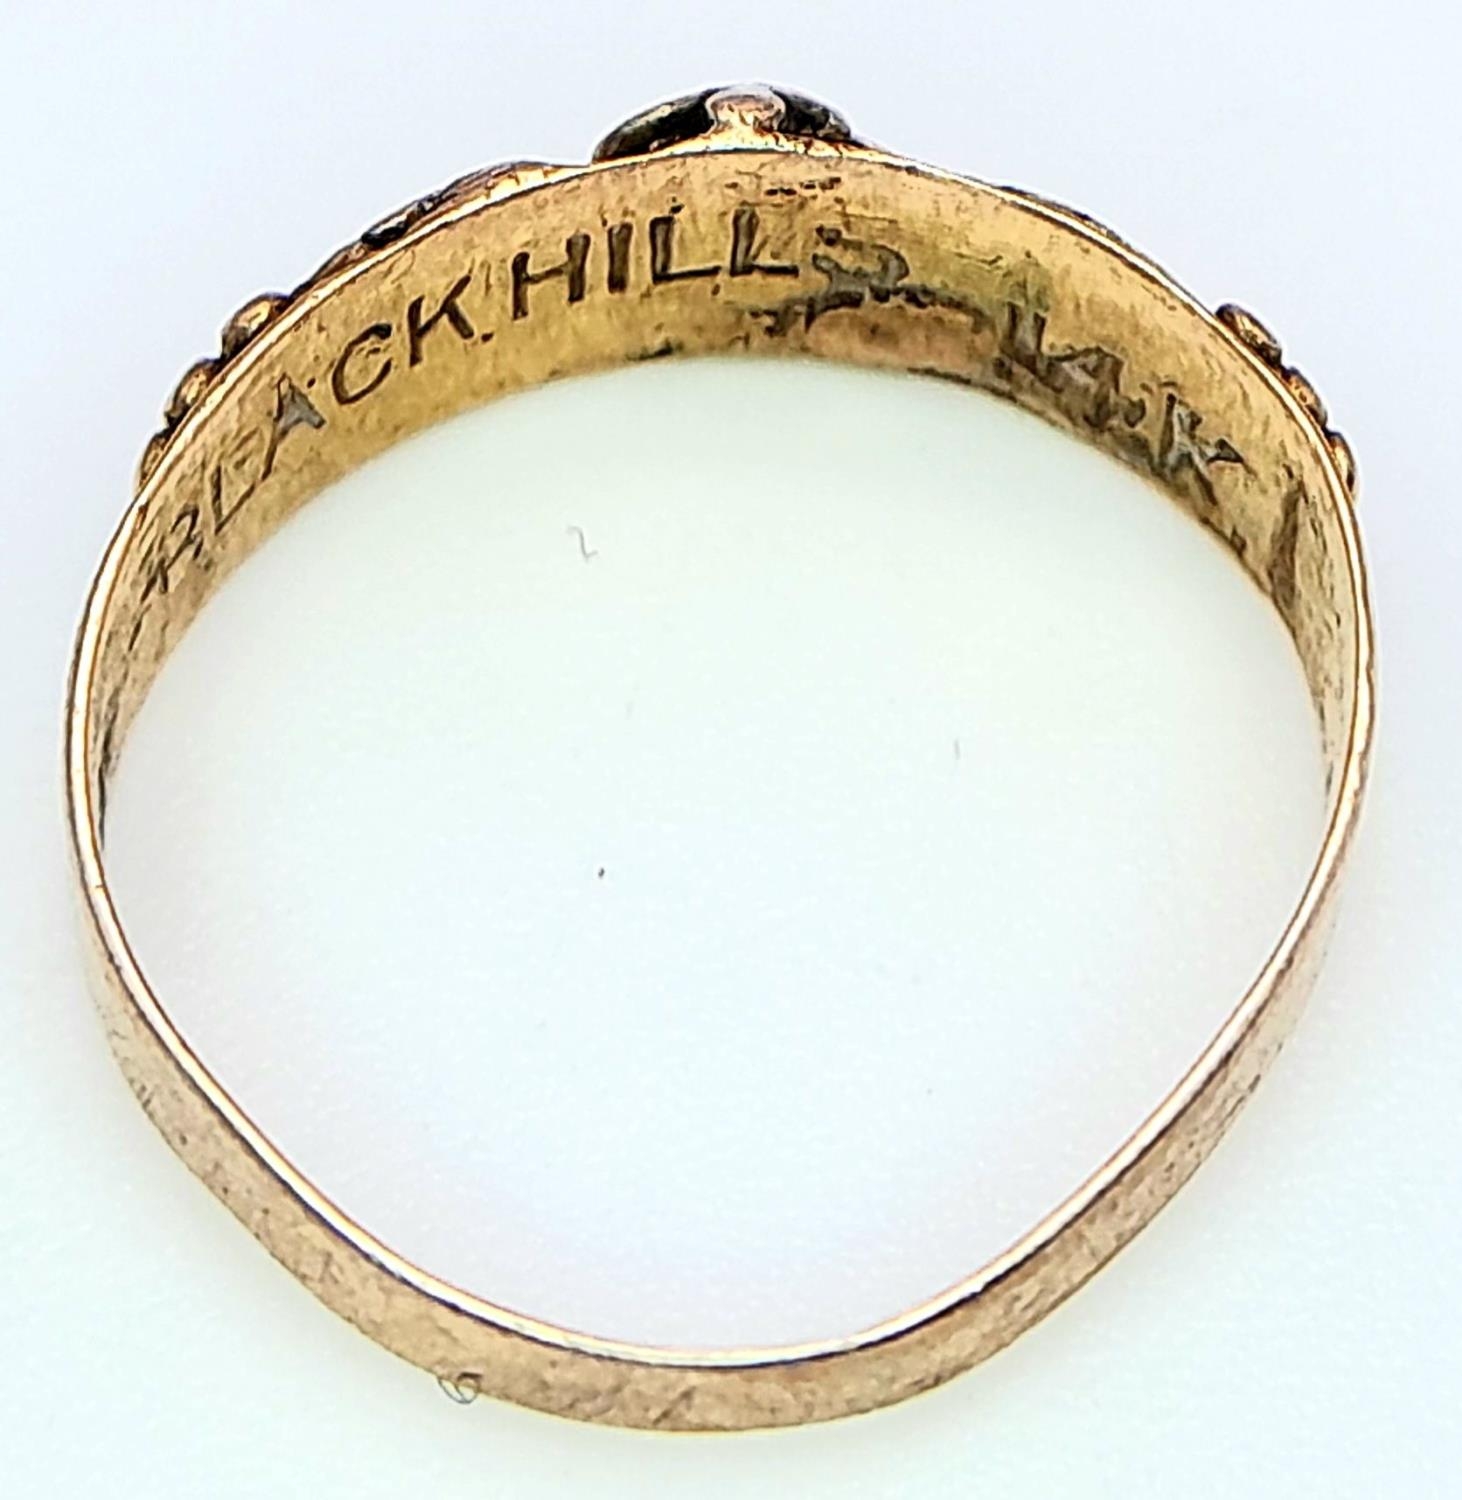 An Antique 14K Tri-Coloured Gold Black Hills Ring. 0.76g weight. - Image 4 of 5